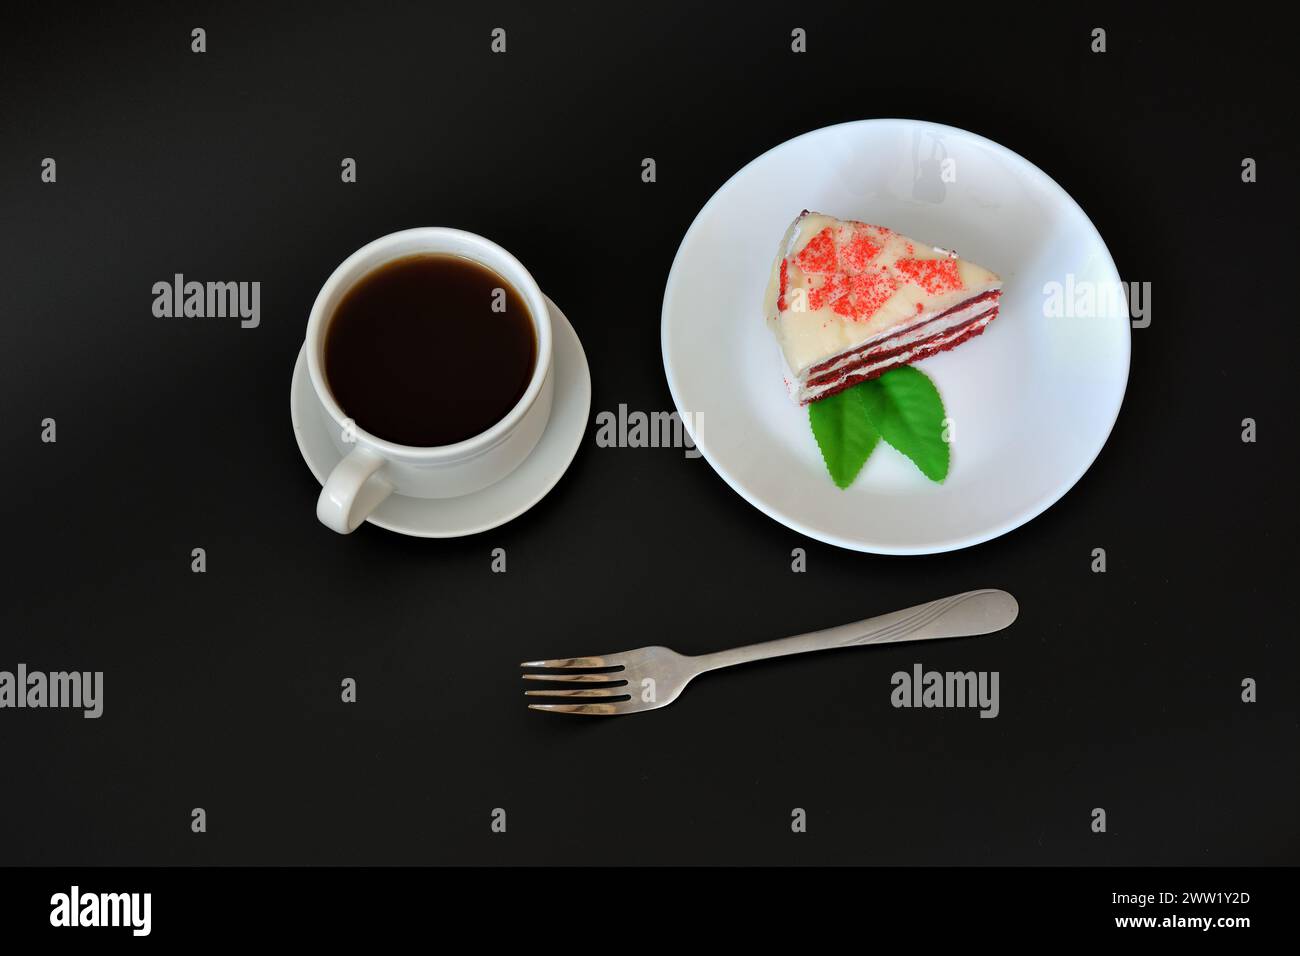 A plate with a piece of Red velvet cake, a fork and a cup of hot black coffee on a black background. Top view, flat lay. Stock Photo